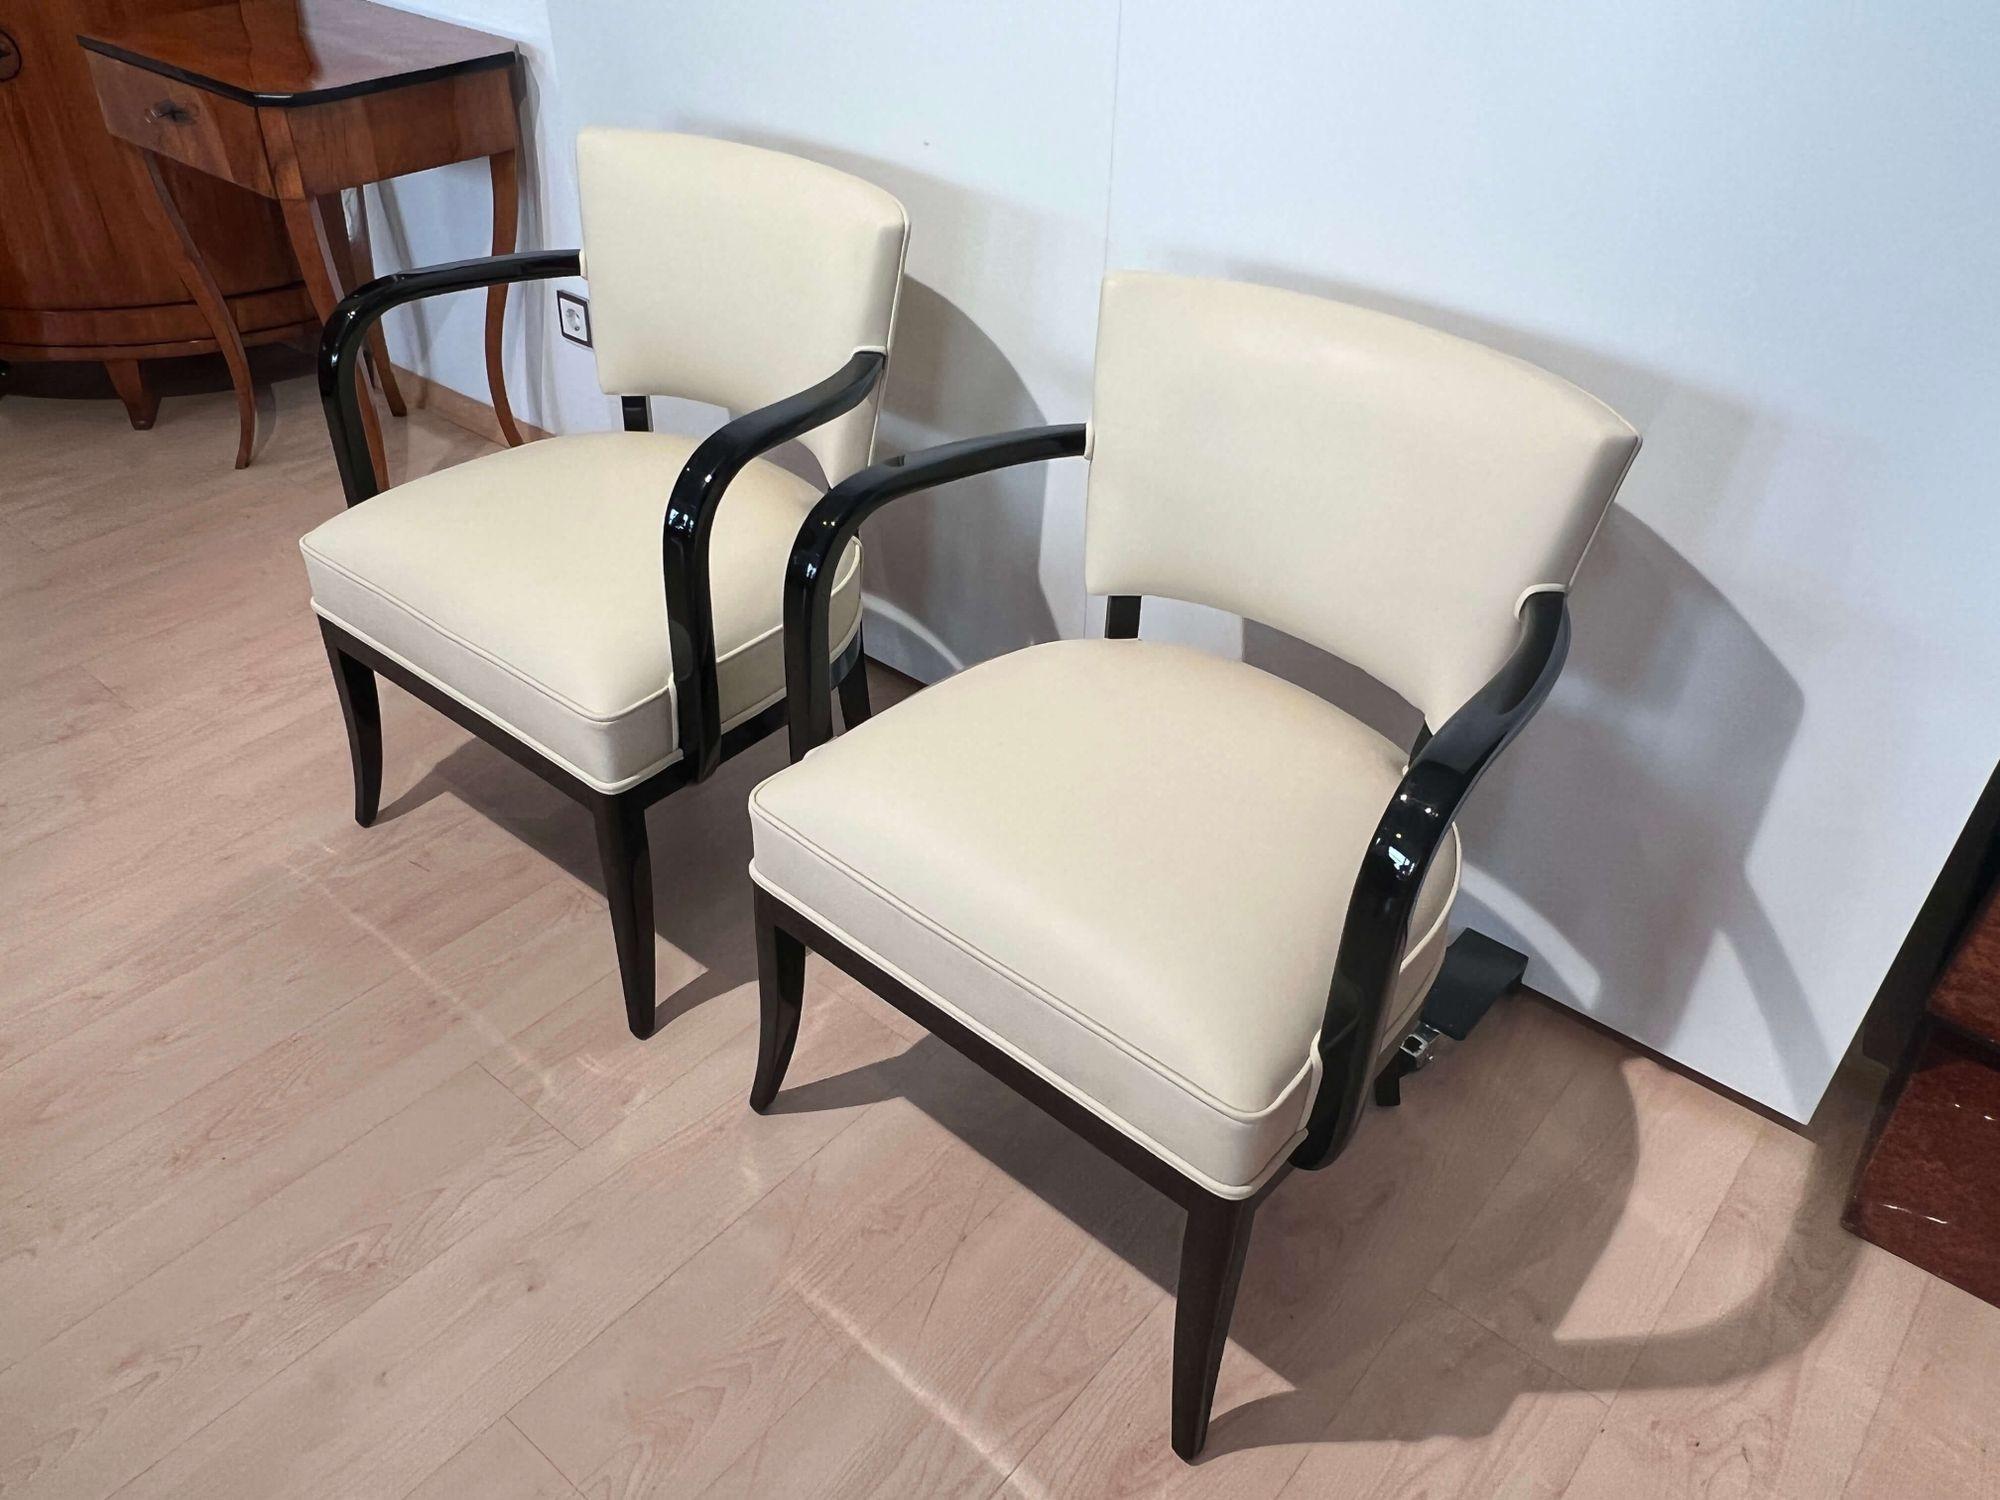 Pair of Art Deco Armchairs, Black Lacquer, Creme Leather, France, 1930s For Sale 13